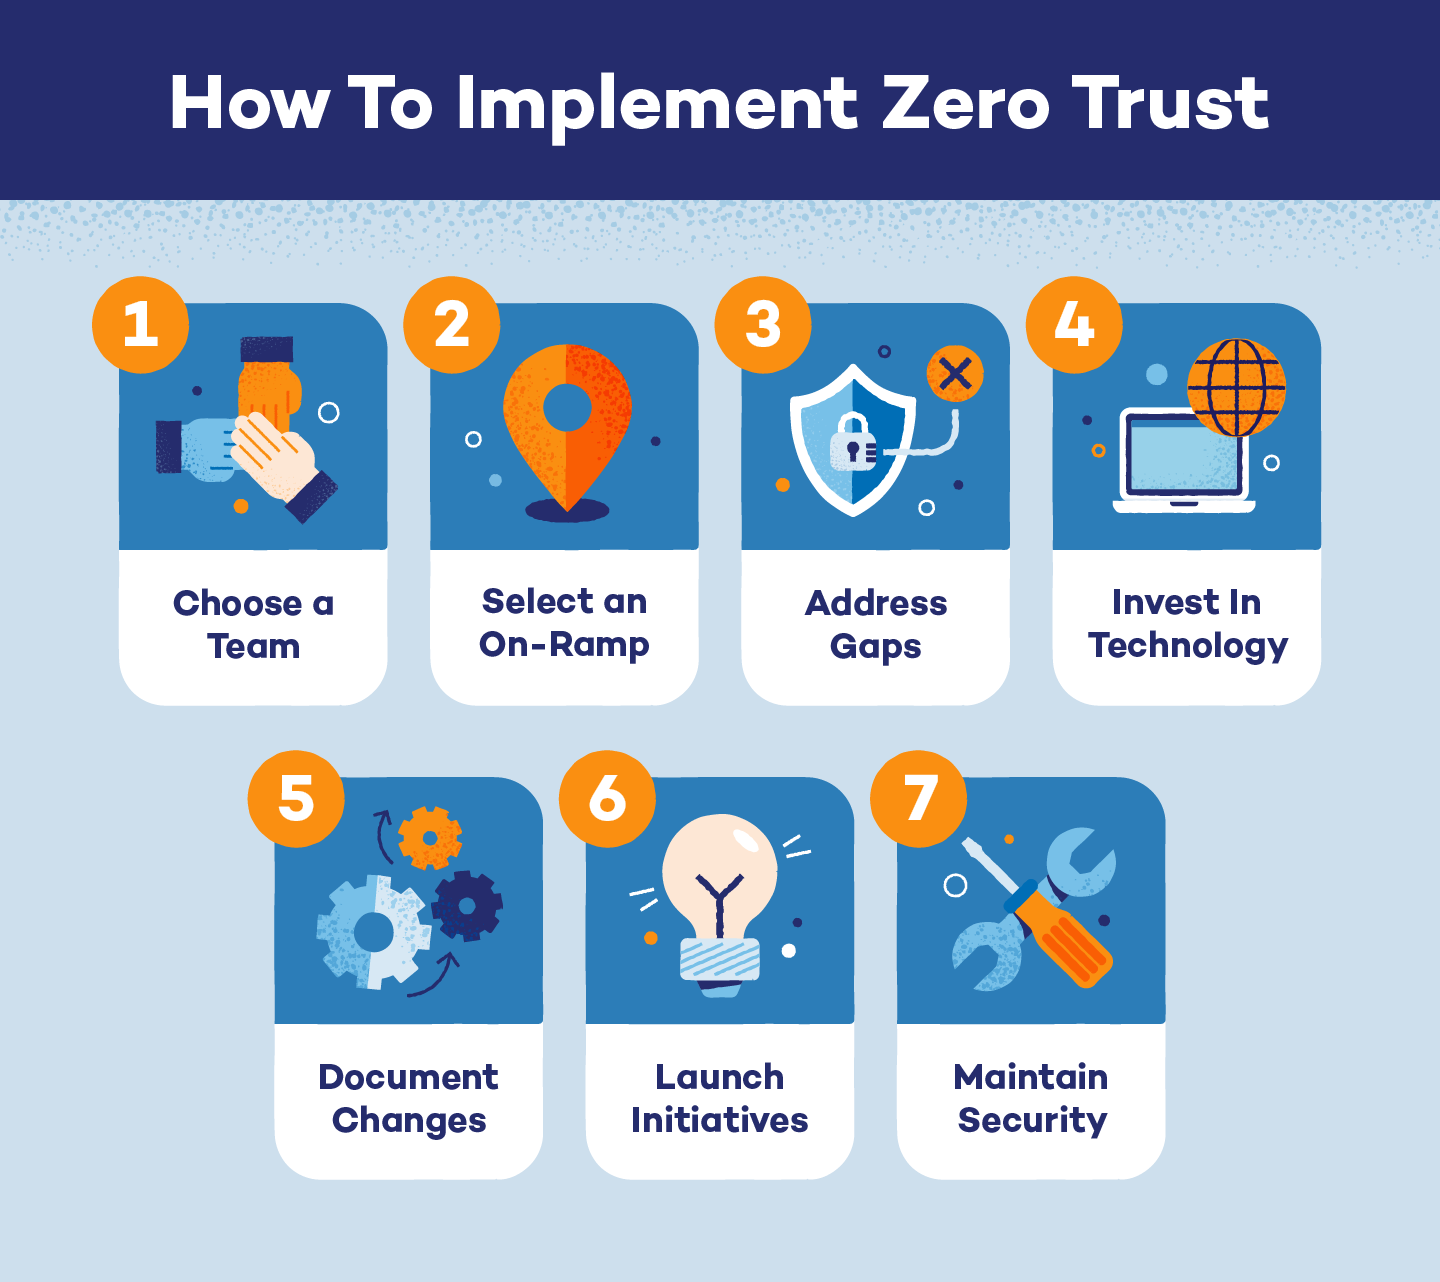 The 7 steps to implementing zero trust include forming a team and launching initiatives.